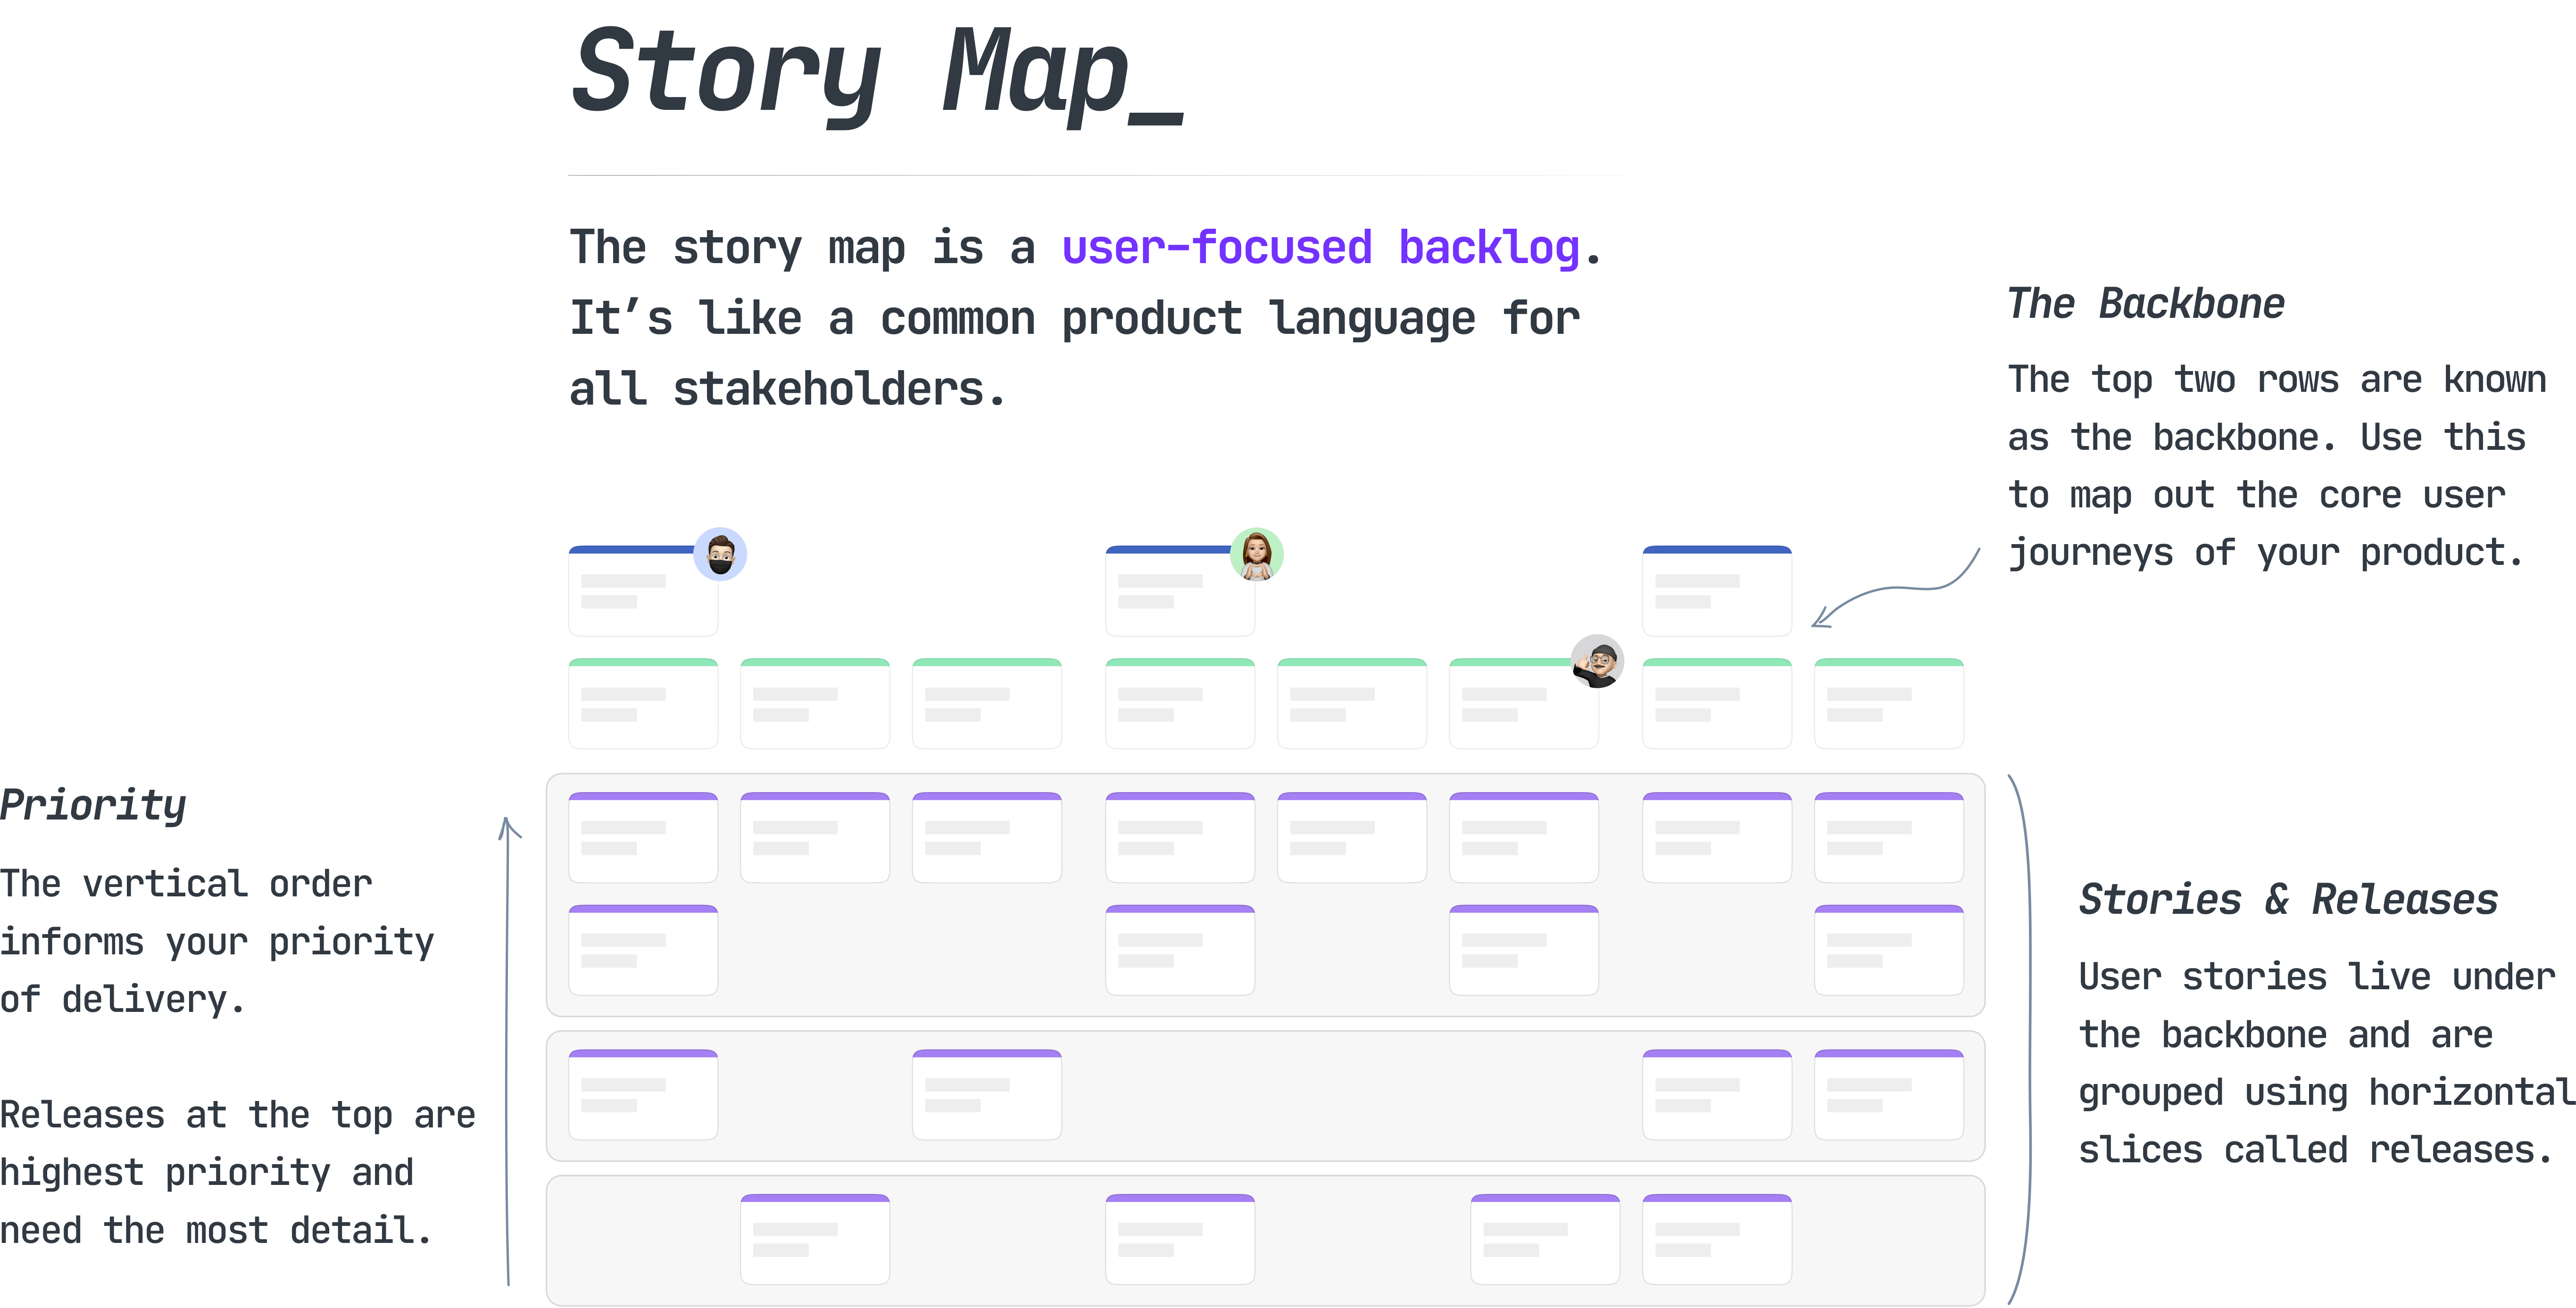 All the different elements of a user story map